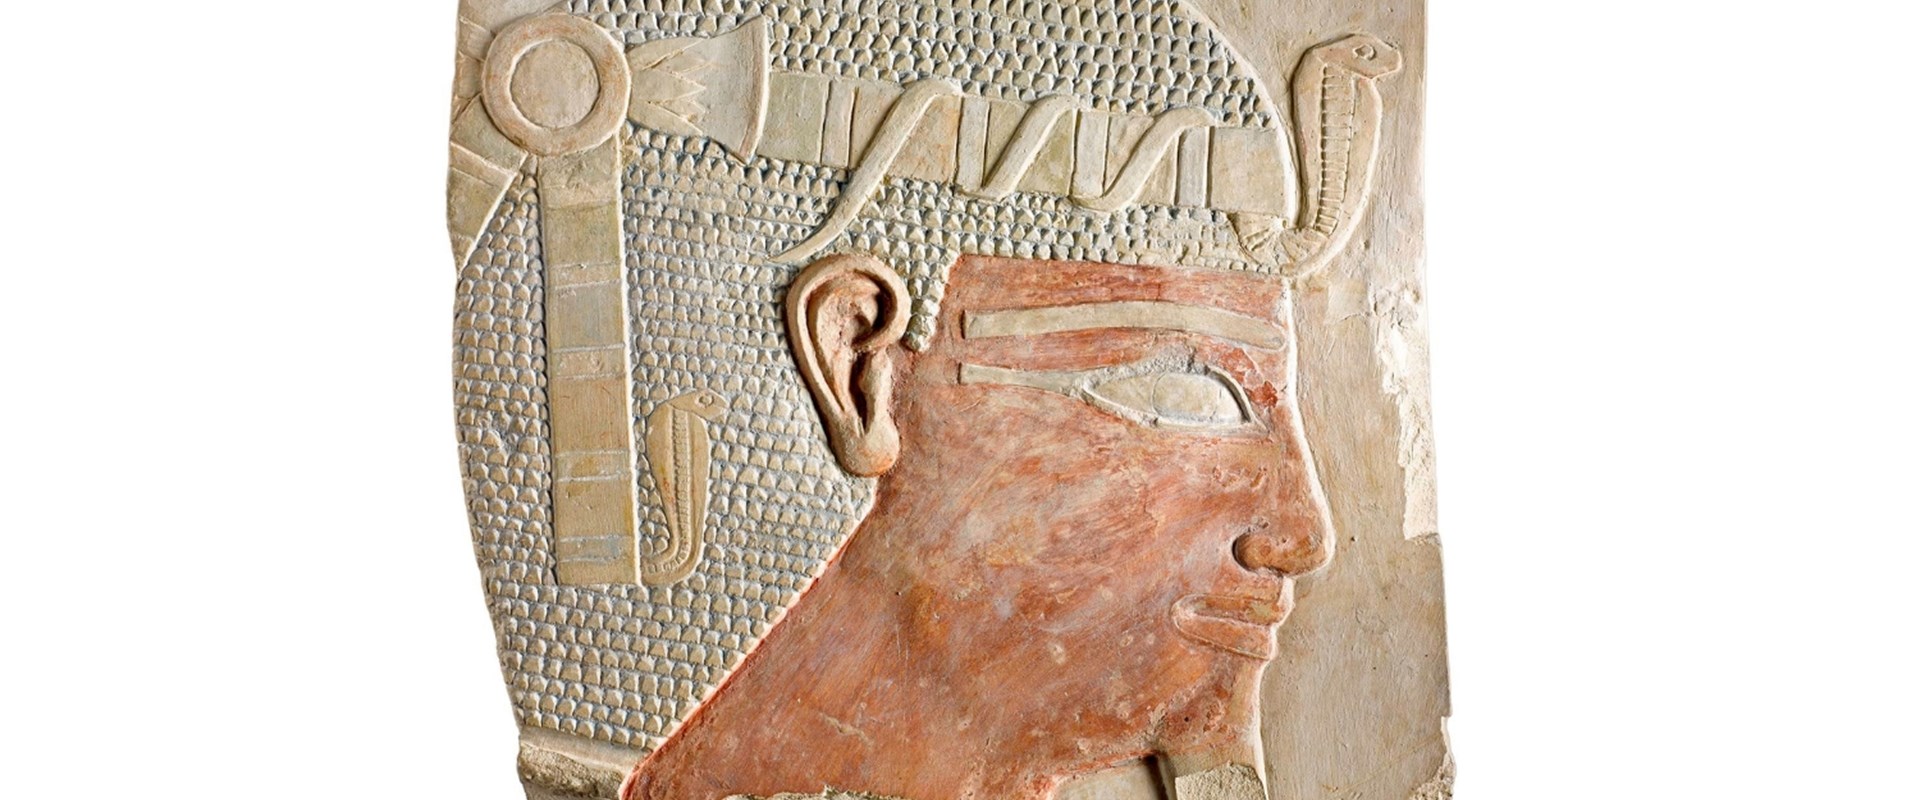 Relief on limestone showing the crowned head of a male Egyptian ruler. His hair is densely patterned with small triangles, and his crown has a cobra at the front.